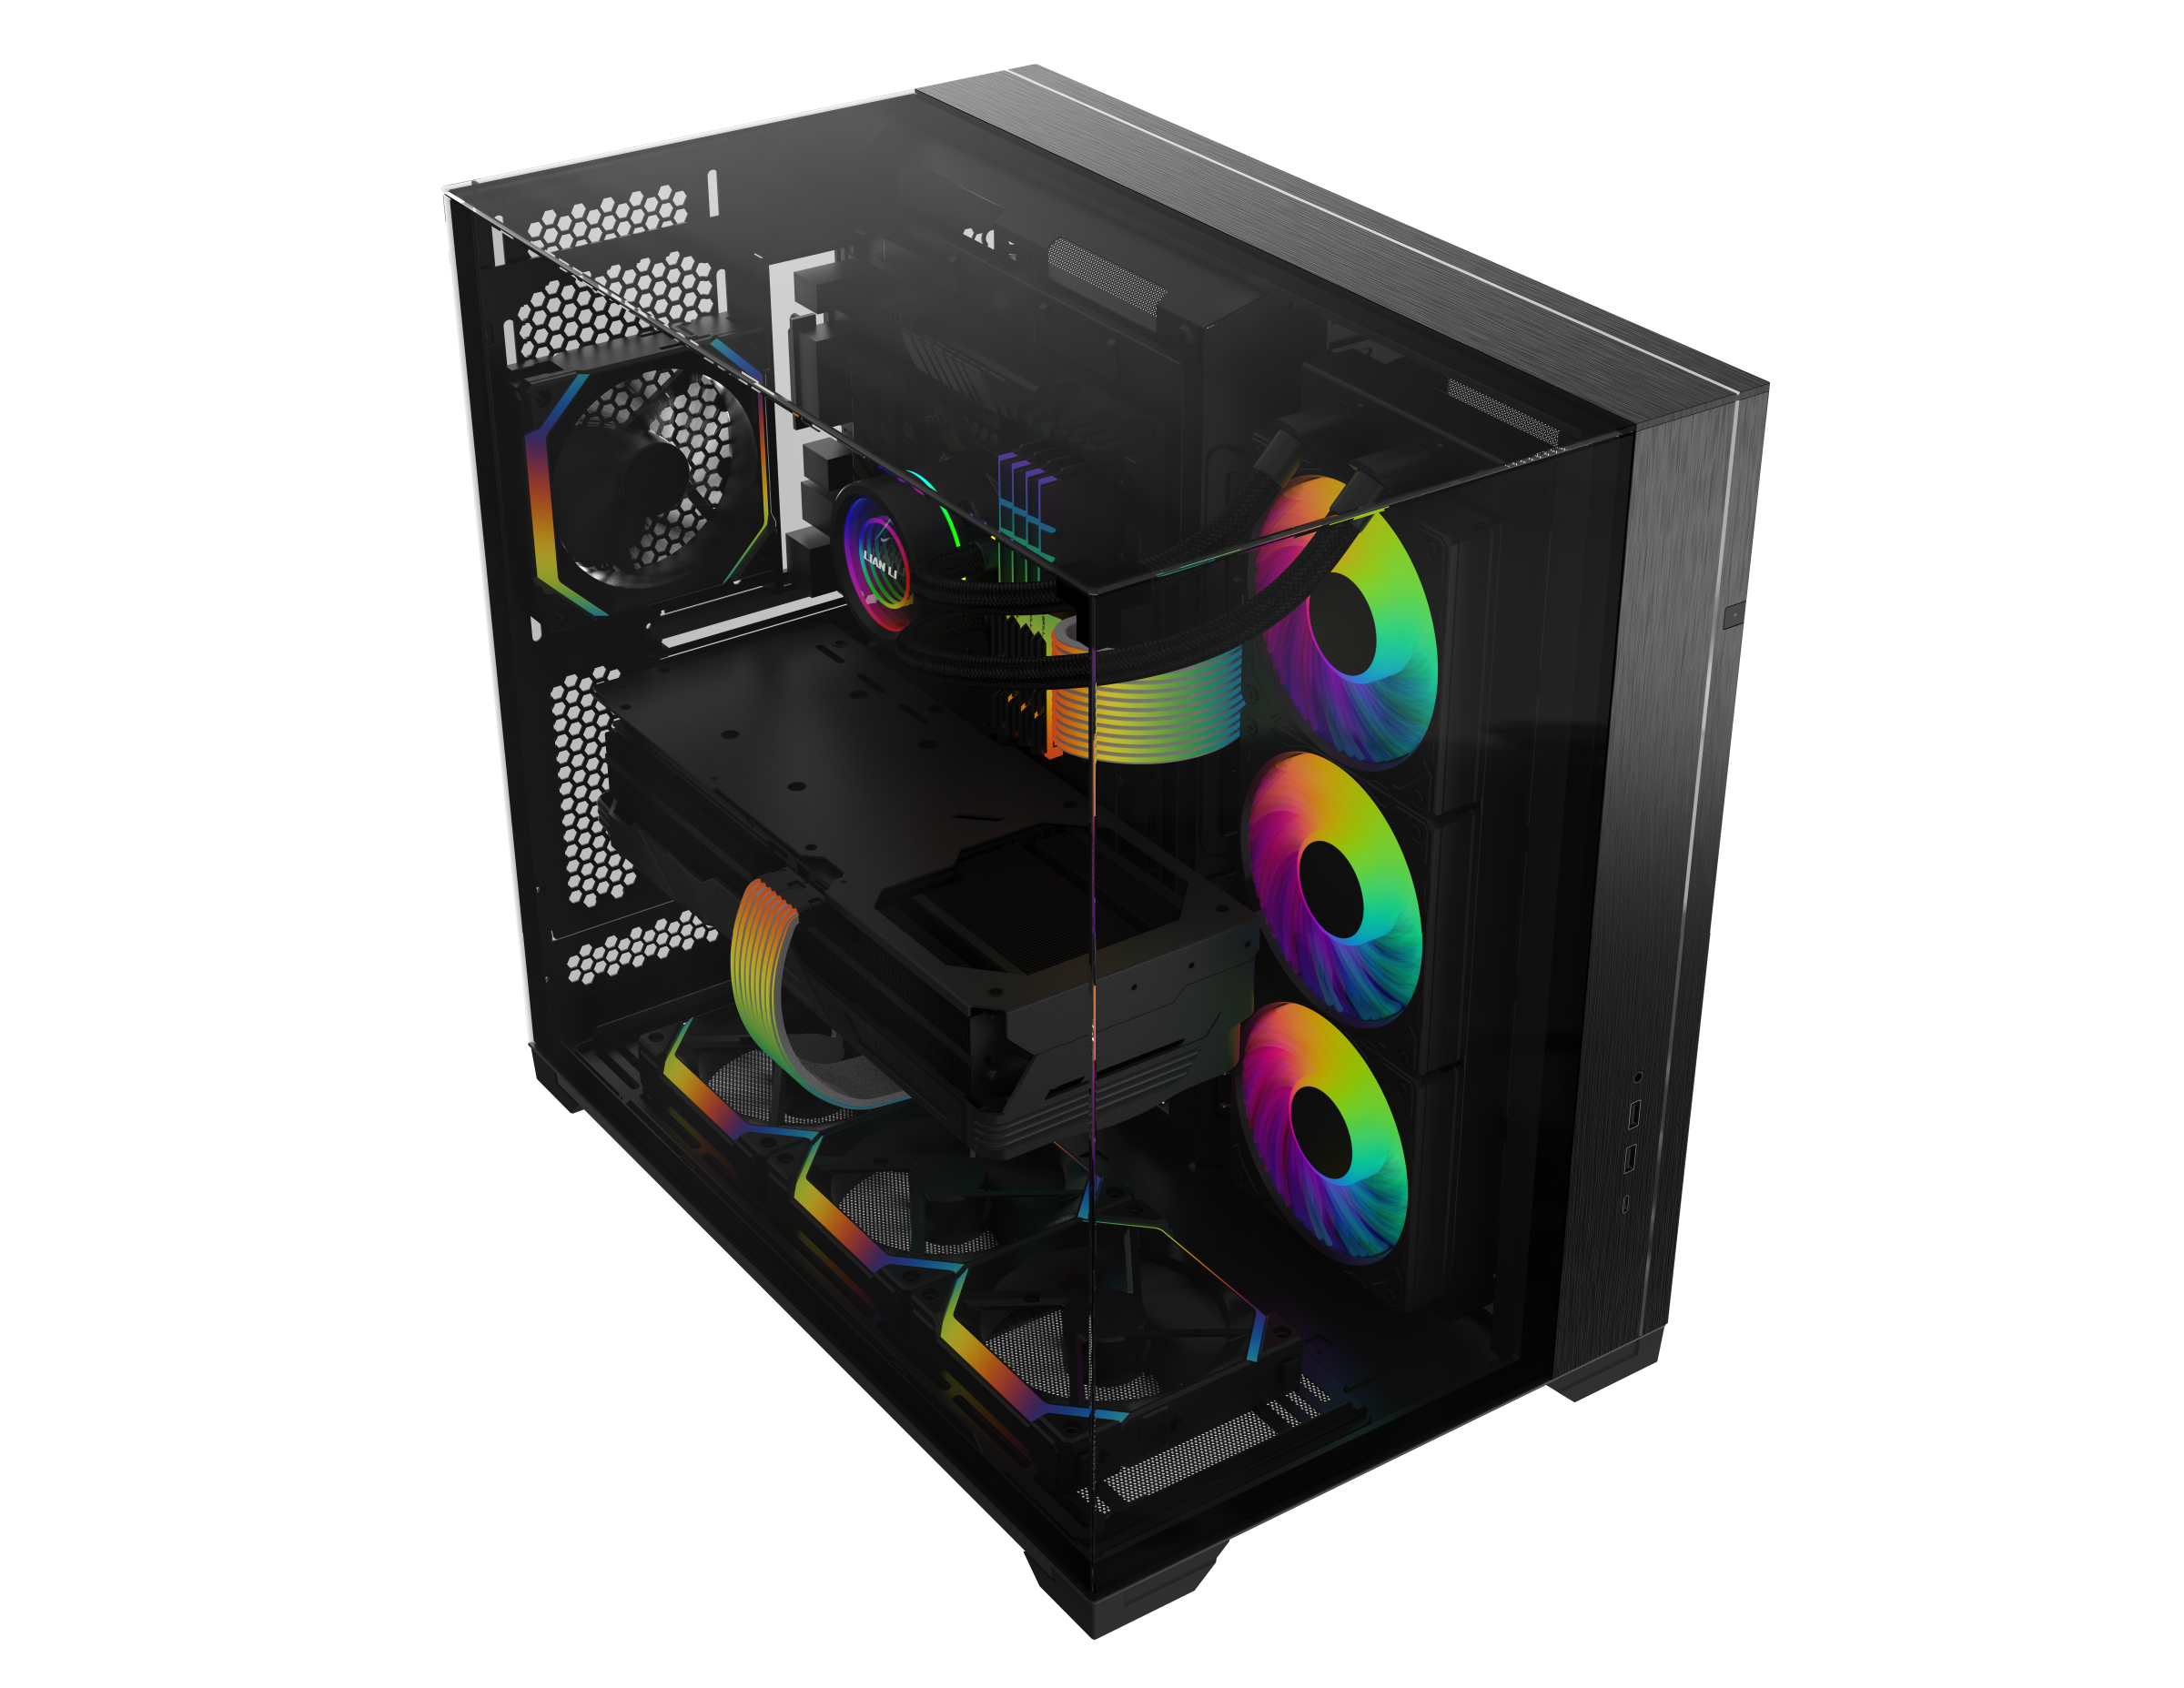 LIAN LI's Concept Case Features GPU In The Front And Radiator On The Right 23